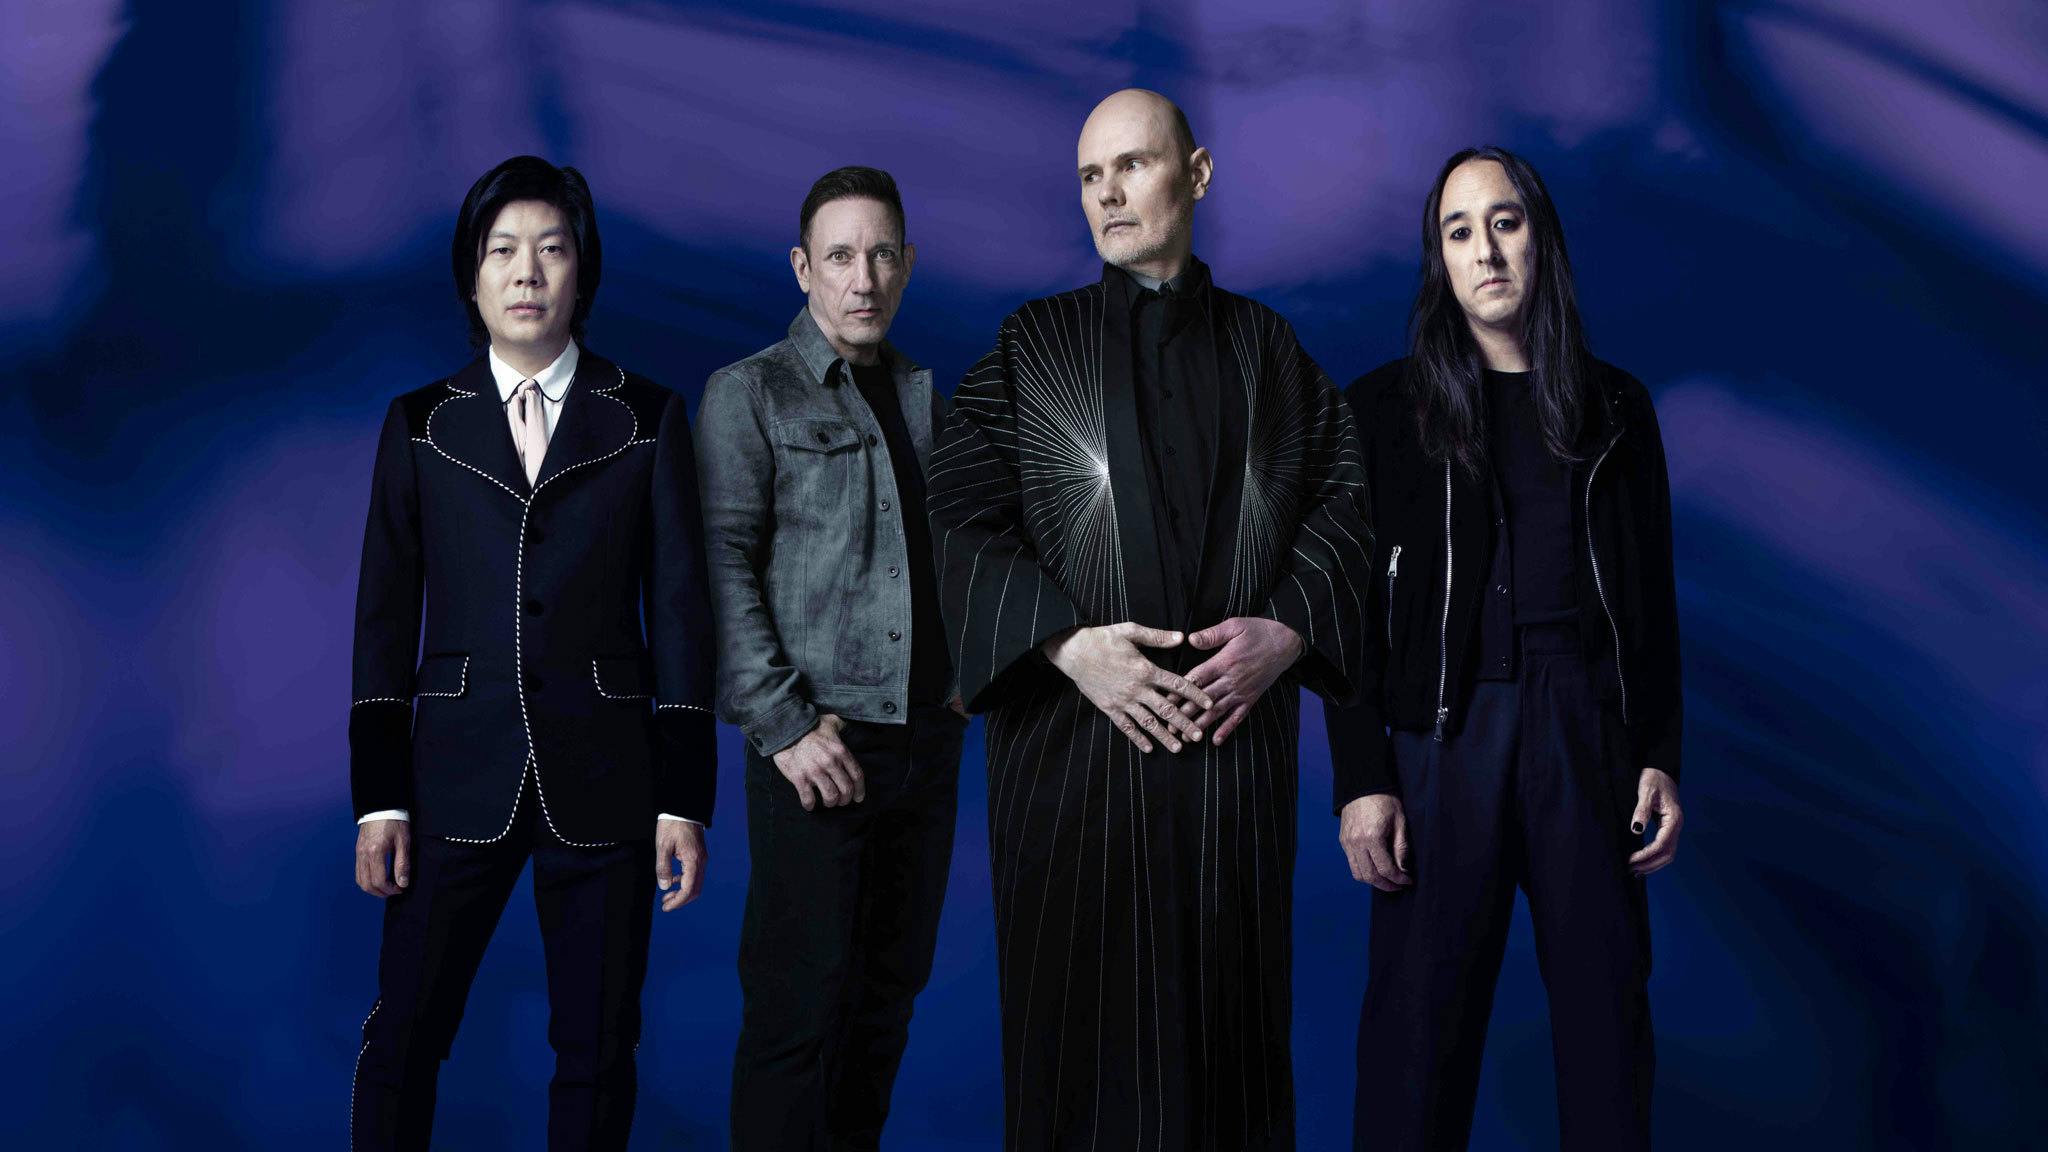 Billy Corgan on new album ATUM: “It goes in a million different directions… It doesn’t feel like there’s too much of any one thing”